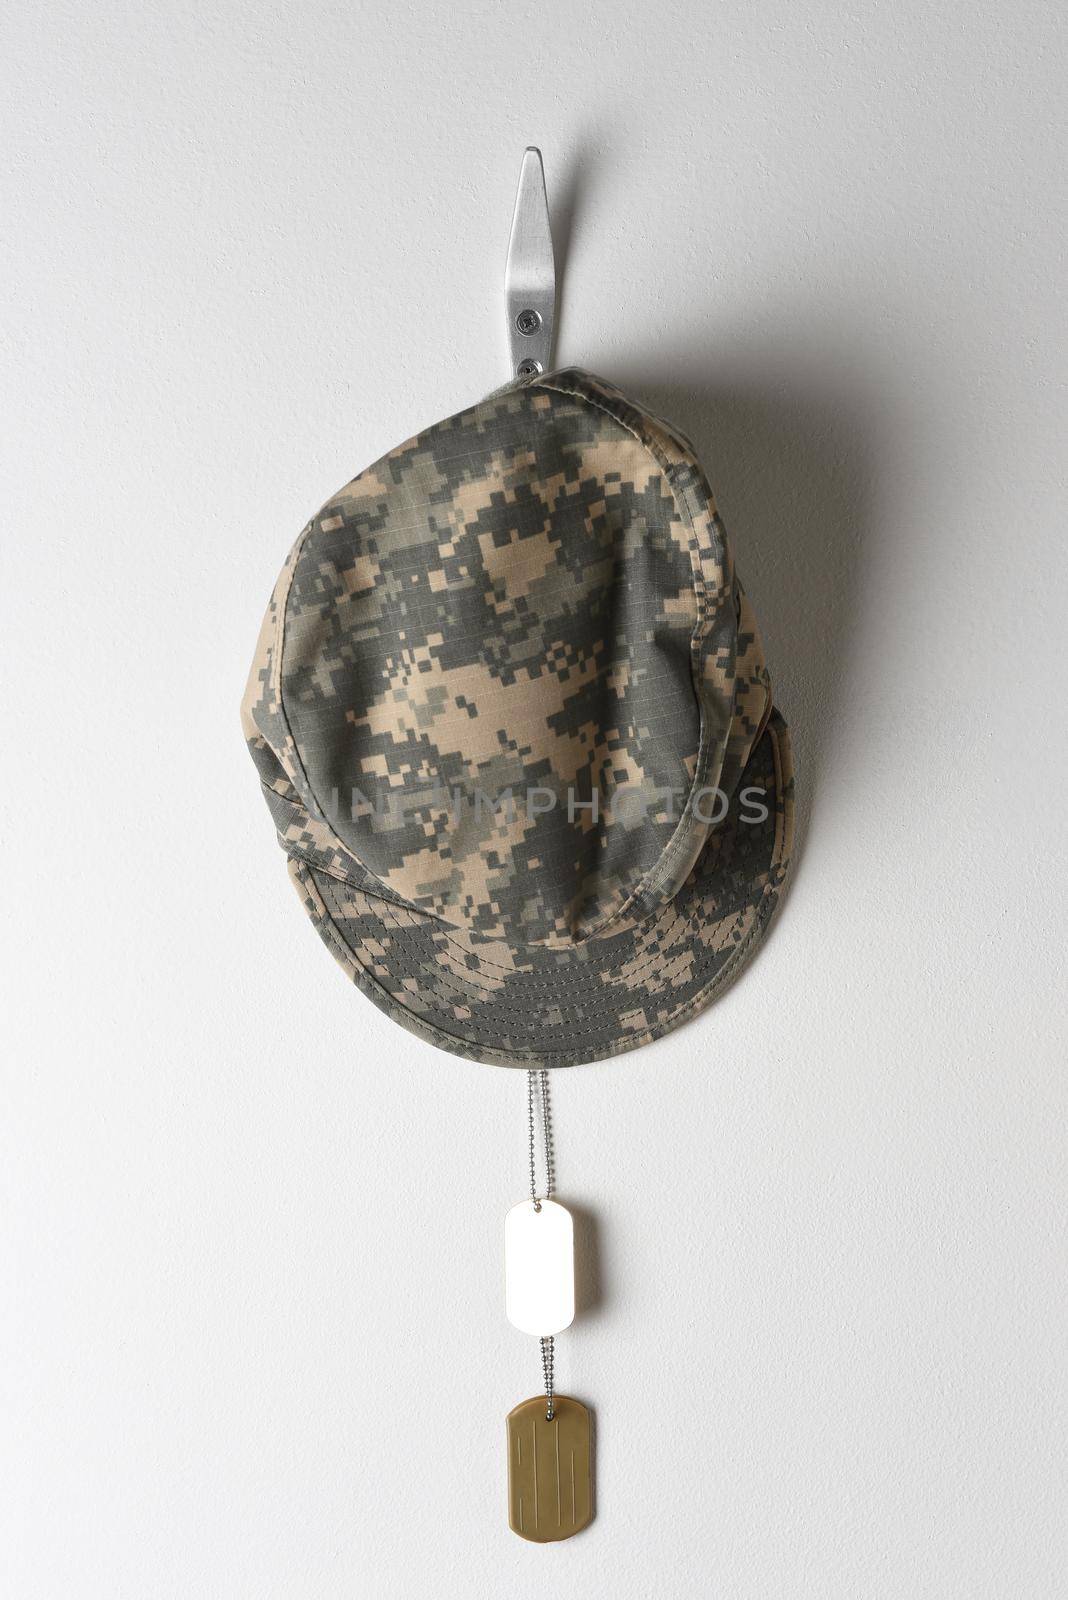 A set of military dog tags and field cap hanging from a hook on a blank wall.